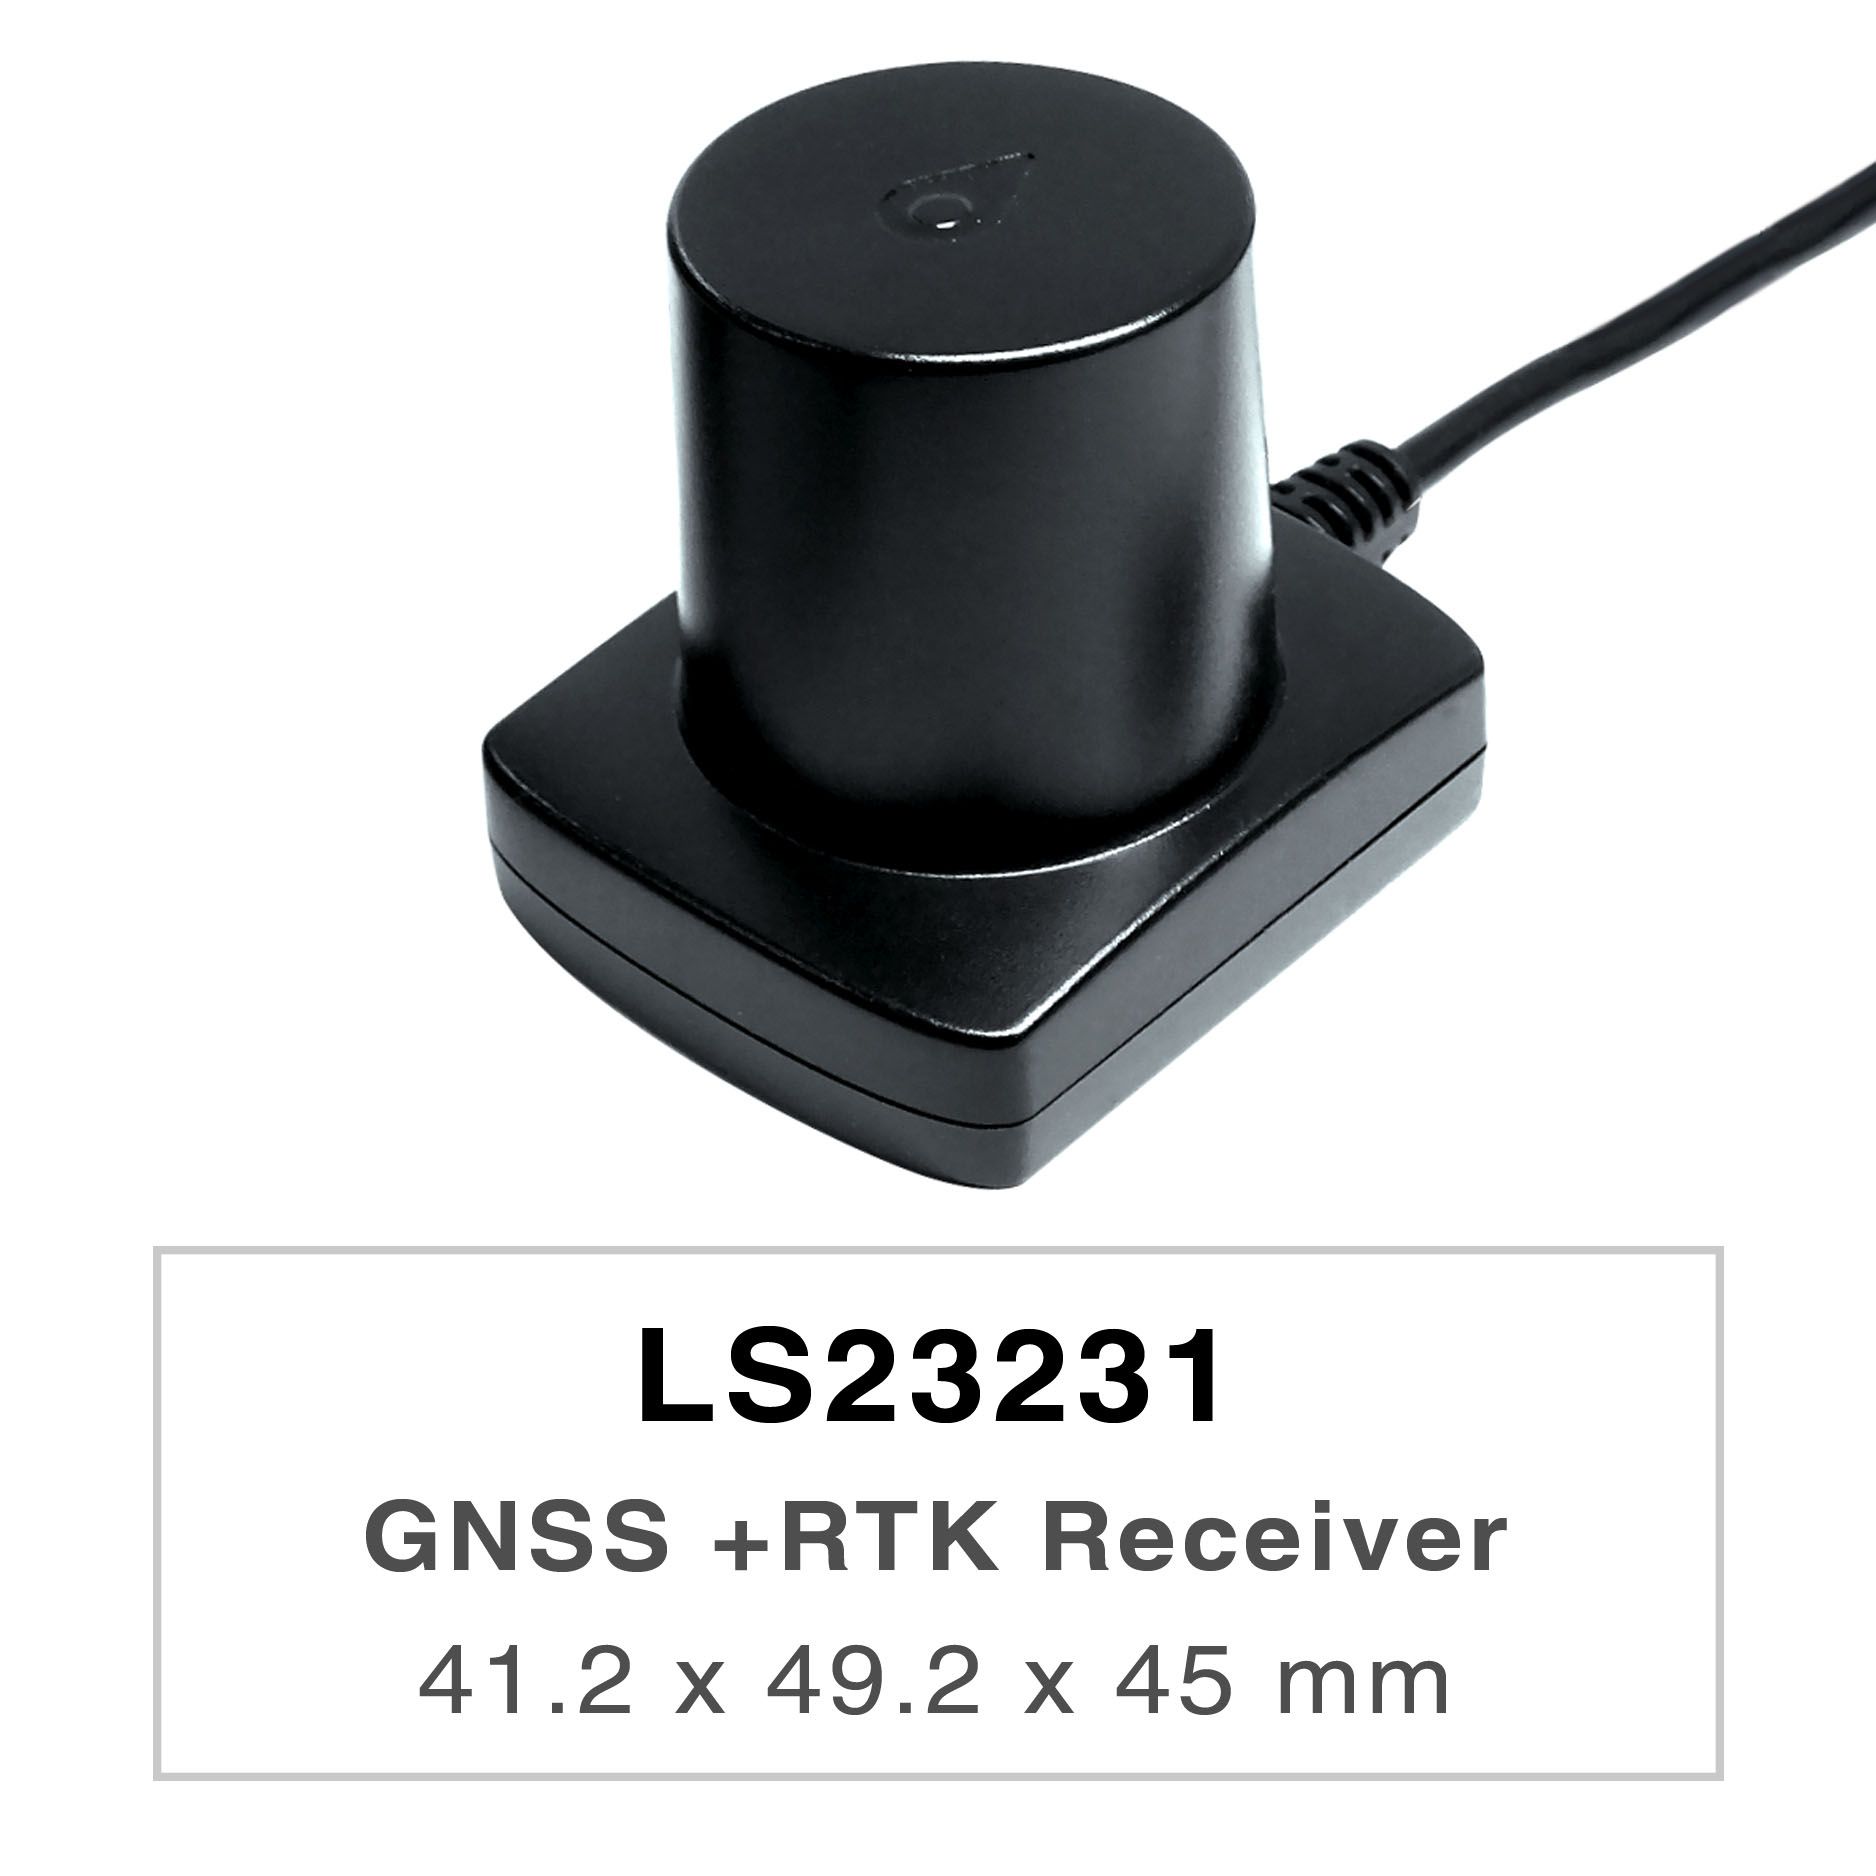 LS23231 is a dual-frequency GNSS RTK receiver designed for Pixhawk2-based drone.